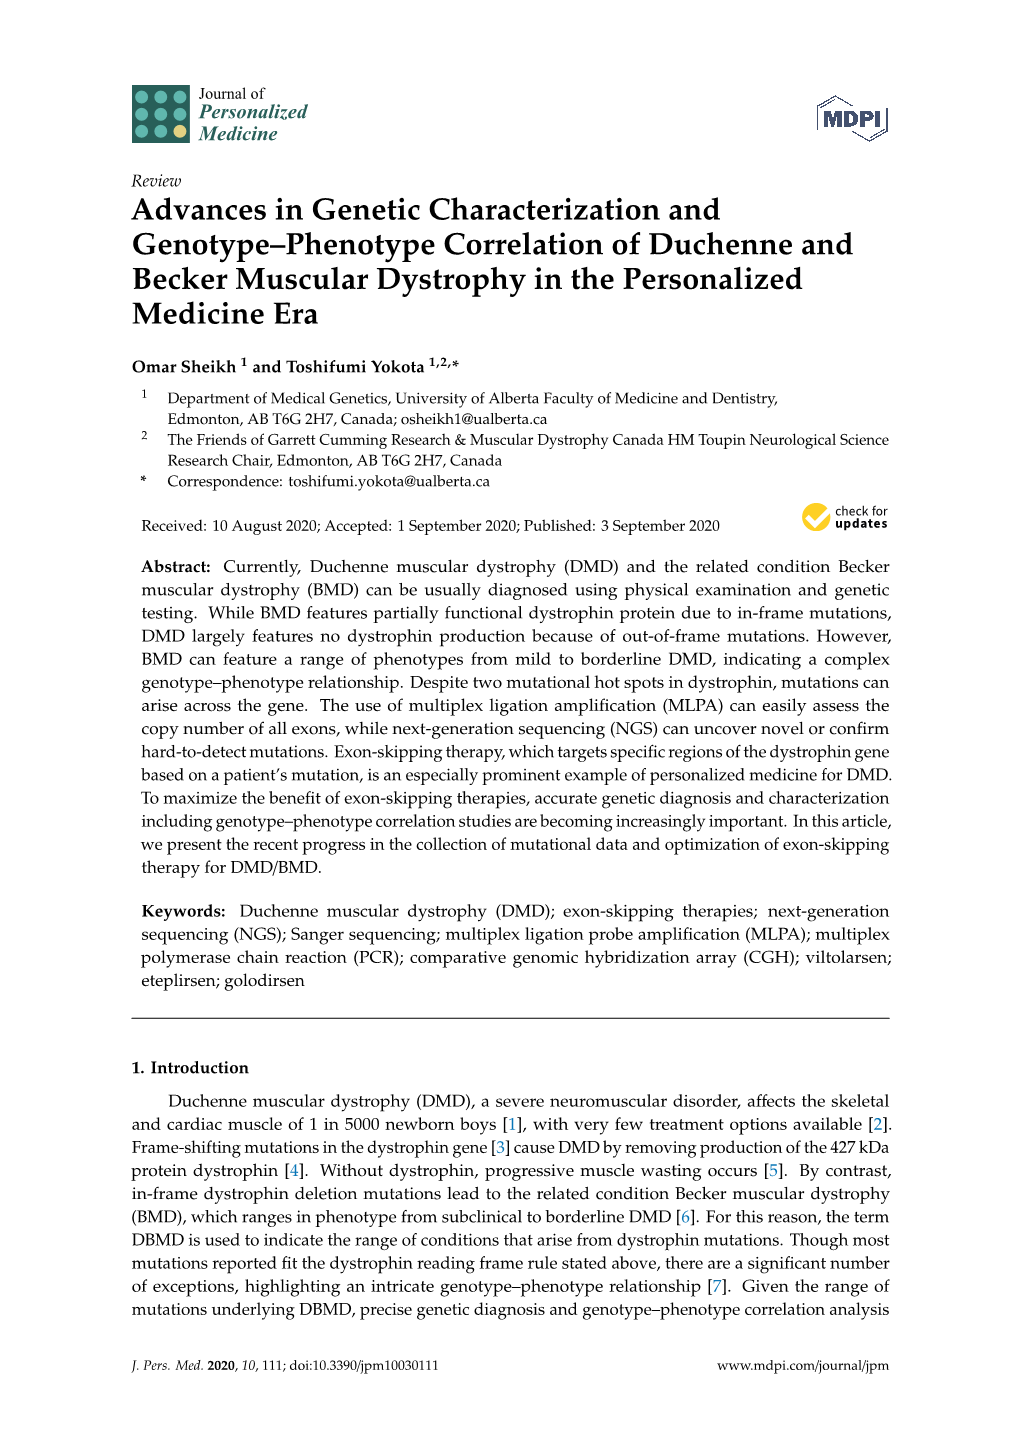 Advances in Genetic Characterization and Genotype–Phenotype Correlation of Duchenne and Becker Muscular Dystrophy in the Personalized Medicine Era